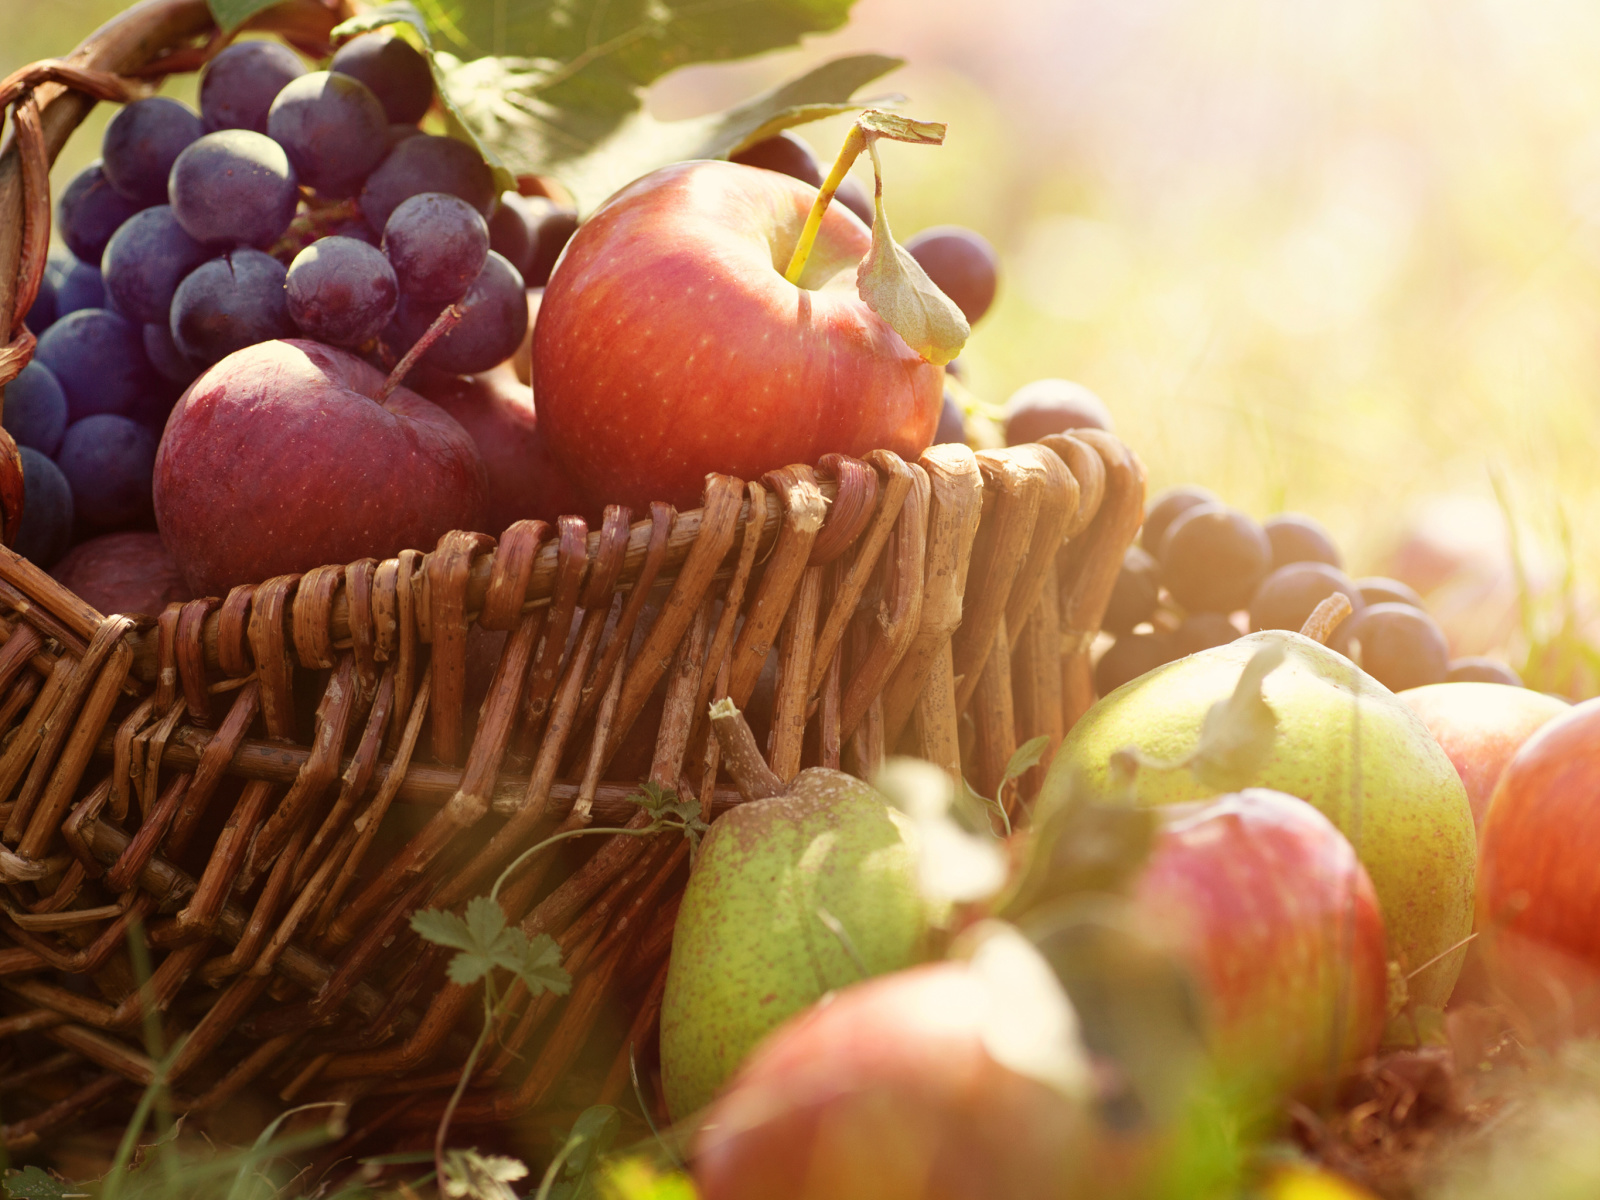 Apples and Grapes wallpaper 1600x1200